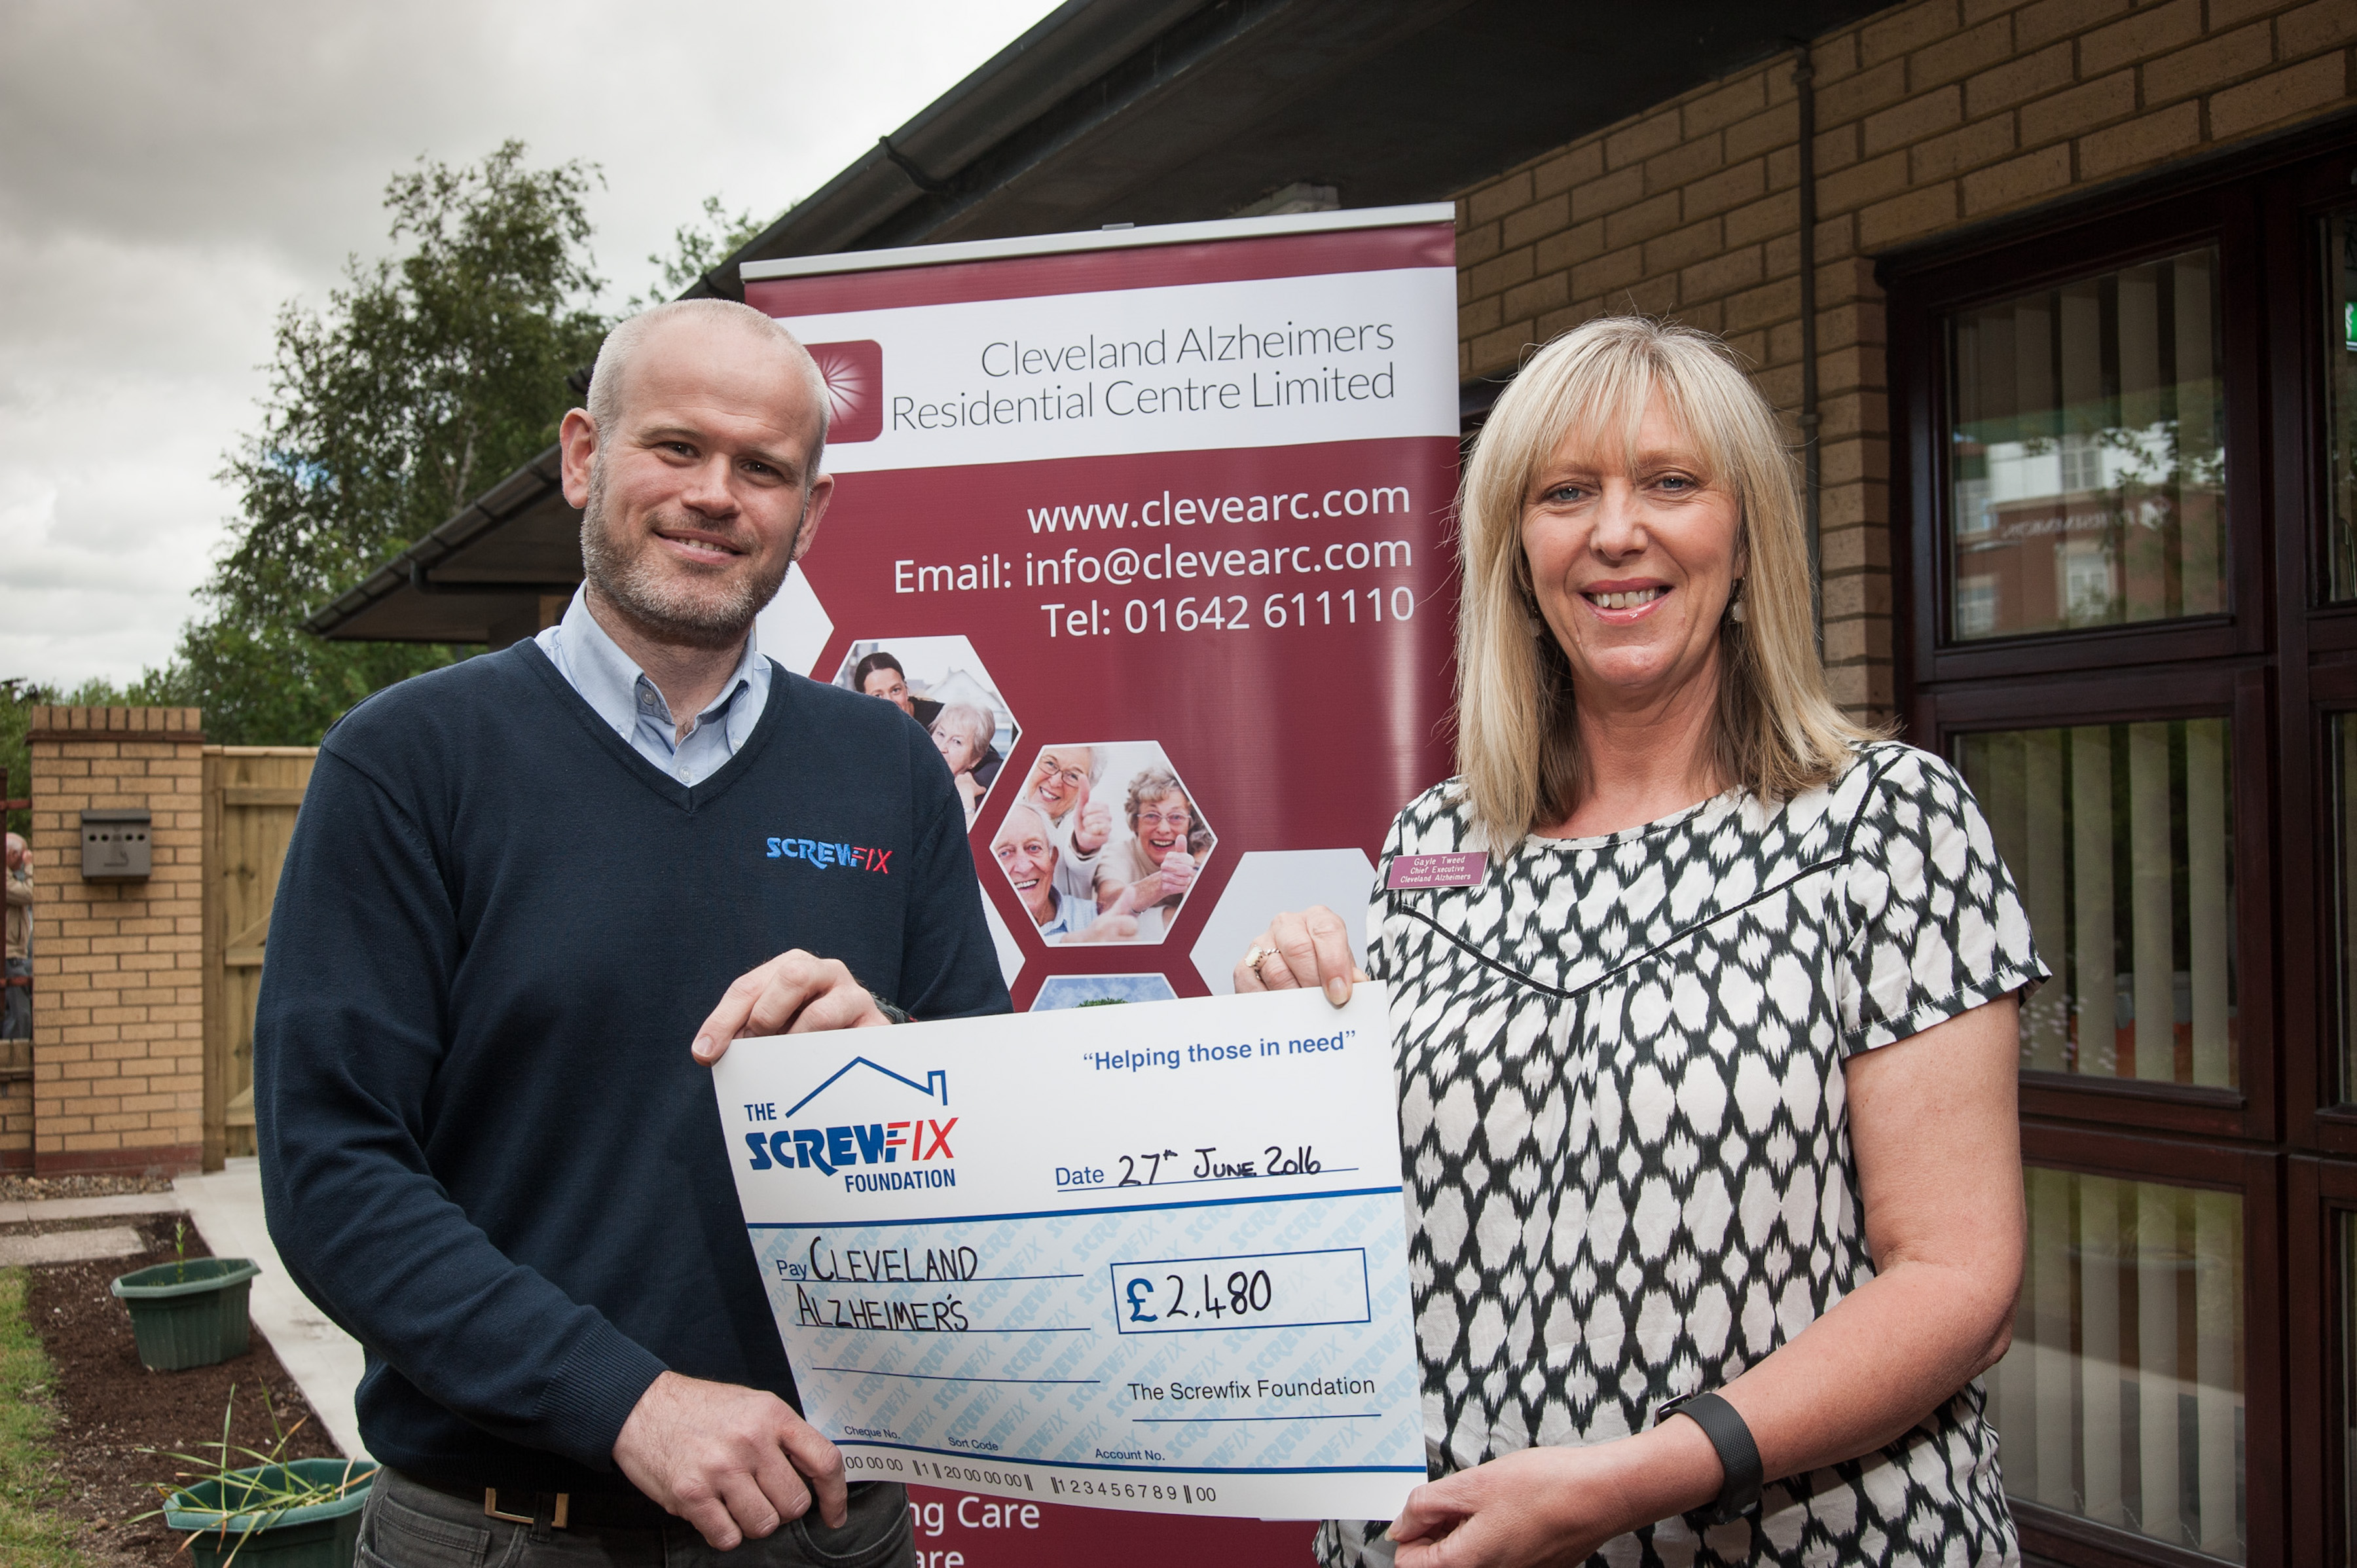 Stockton-on-Tees based charity gets a helping hand from the Screwfix Foundation